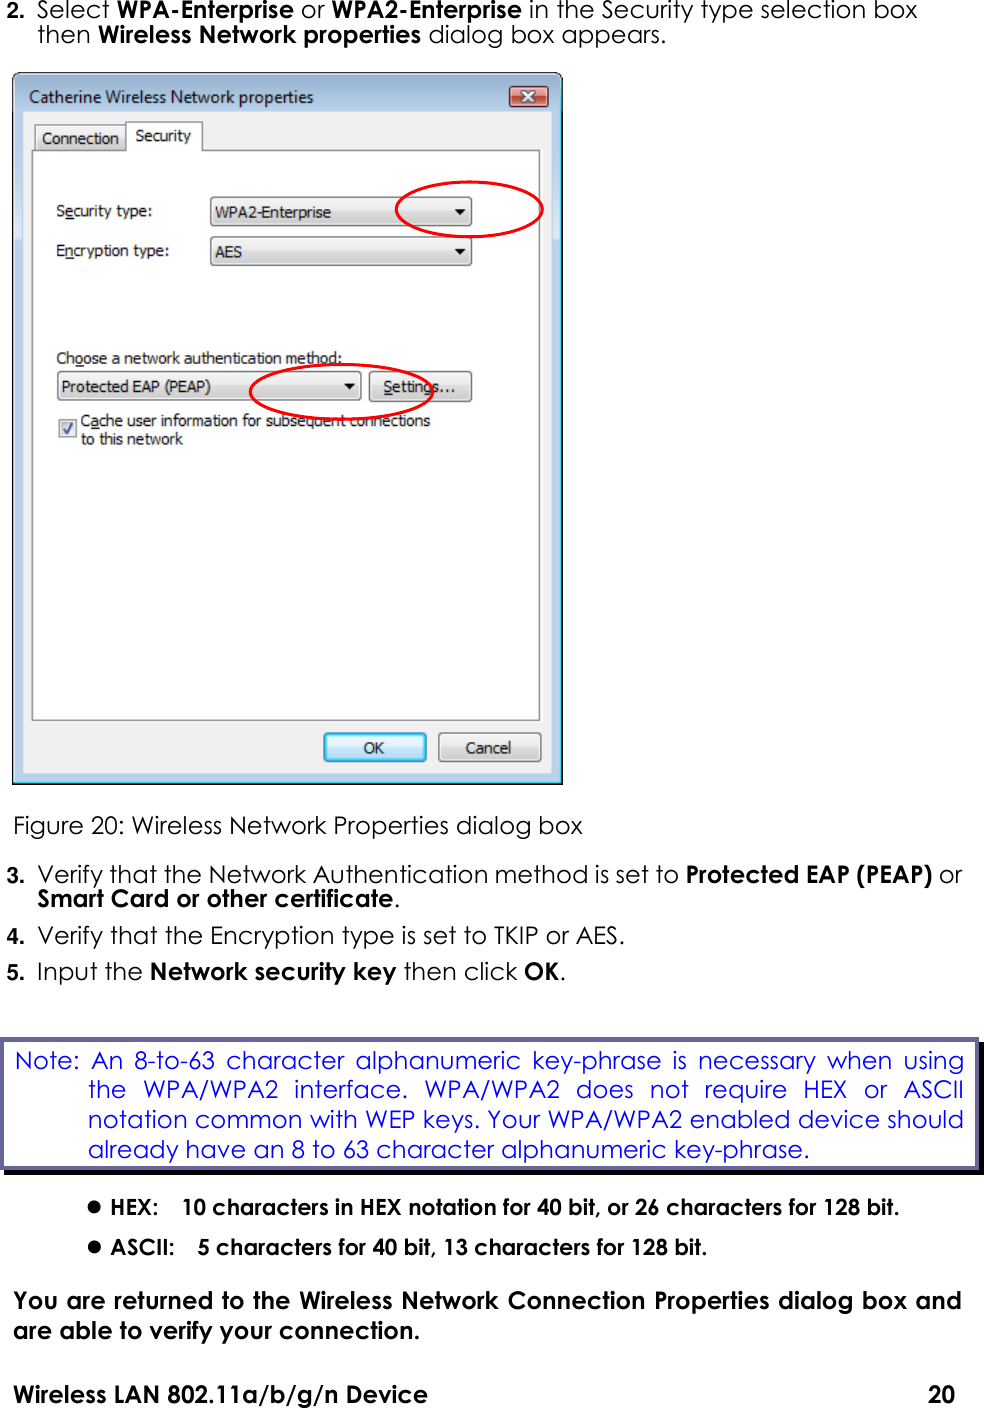 Wireless LAN 802.11a/b/g/n Device                                                                                  20 2. Select WPA-Enterprise or WPA2-Enterprise in the Security type selection box then Wireless Network properties dialog box appears.    Figure 20: Wireless Network Properties dialog box 3. Verify that the Network Authentication method is set to Protected EAP (PEAP) or Smart Card or other certificate. 4. Verify that the Encryption type is set to TKIP or AES. 5. Input the Network security key then click OK.  HEX:    10 characters in HEX notation for 40 bit, or 26 characters for 128 bit.  ASCII:    5 characters for 40 bit, 13 characters for 128 bit. You are returned to the Wireless Network Connection Properties dialog box and are able to verify your connection.   Note:  An  8-to-63  character  alphanumeric  key-phrase  is  necessary  when  using the  WPA/WPA2  interface.  WPA/WPA2  does  not  require  HEX  or  ASCII notation common with WEP keys. Your WPA/WPA2 enabled device should already have an 8 to 63 character alphanumeric key-phrase.   